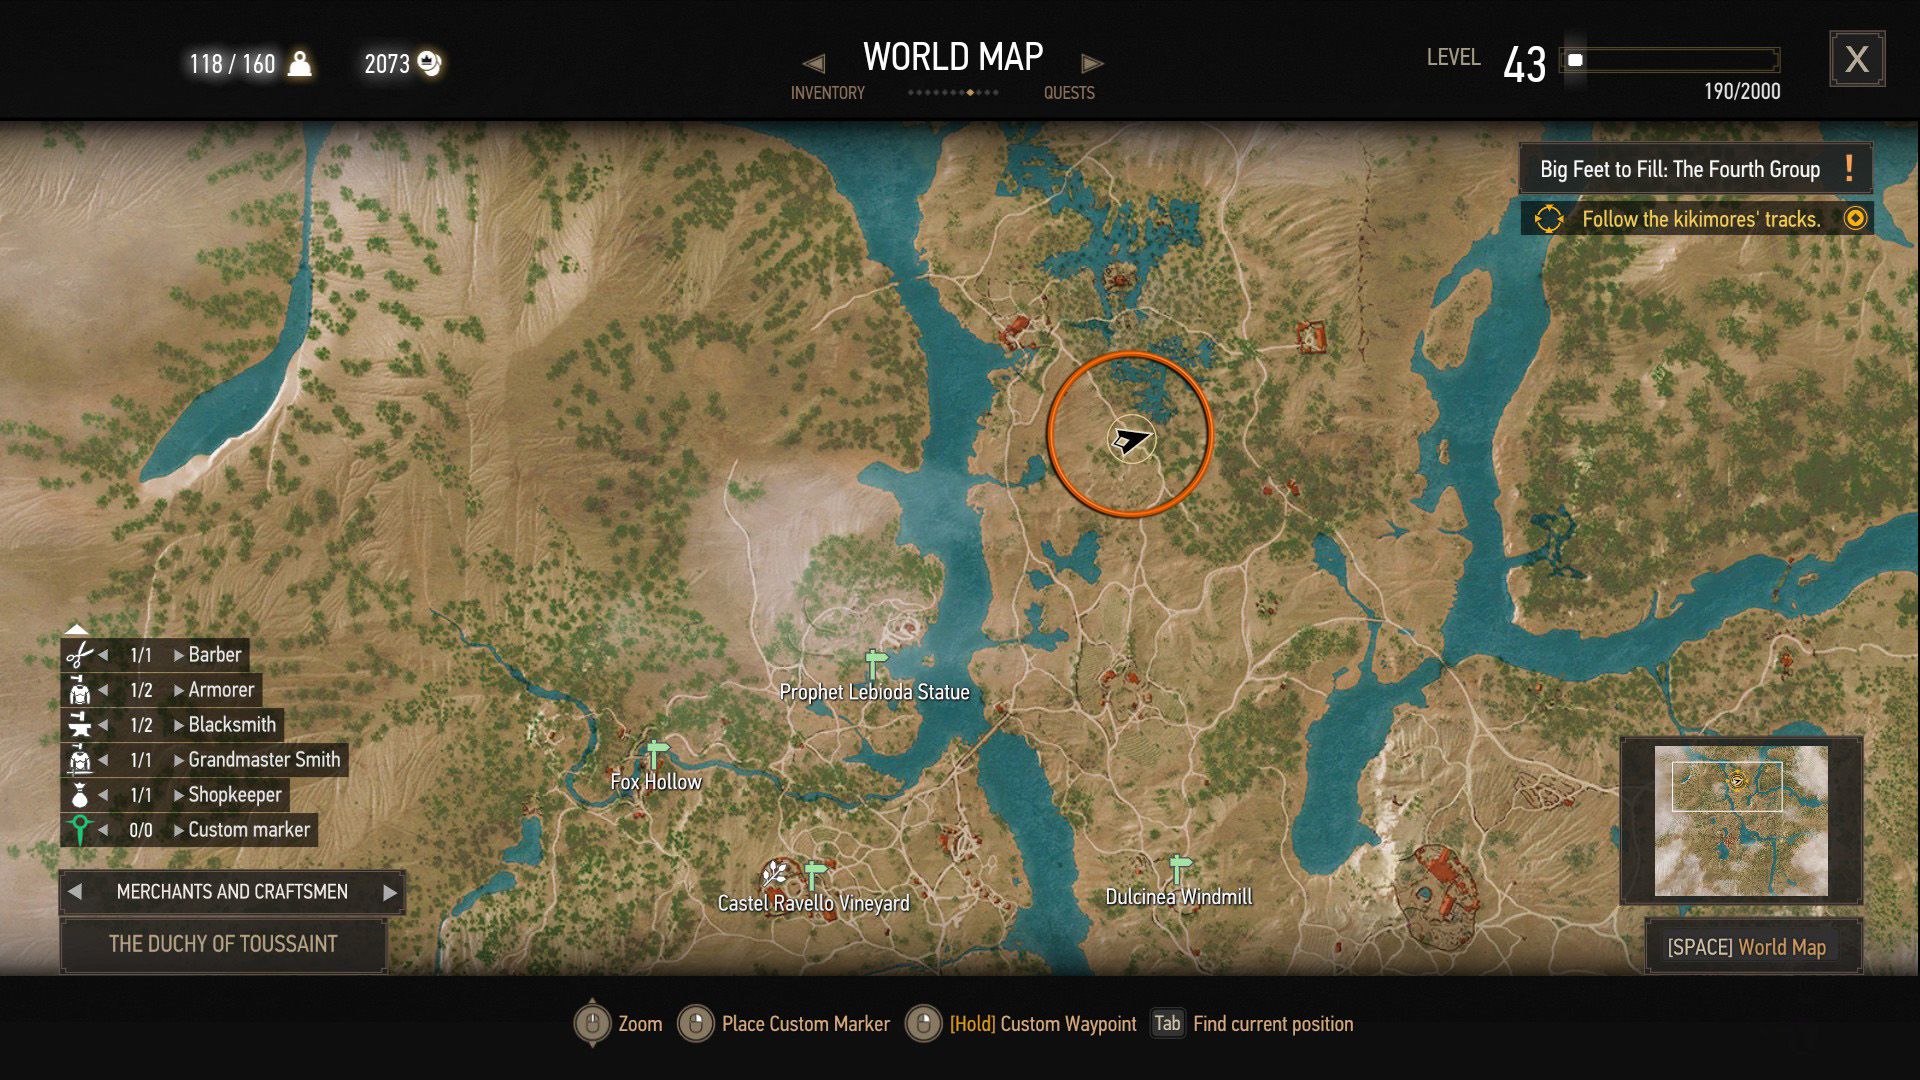 A screenshot of The Witcher 3 map with an orange circle above the quest objective.